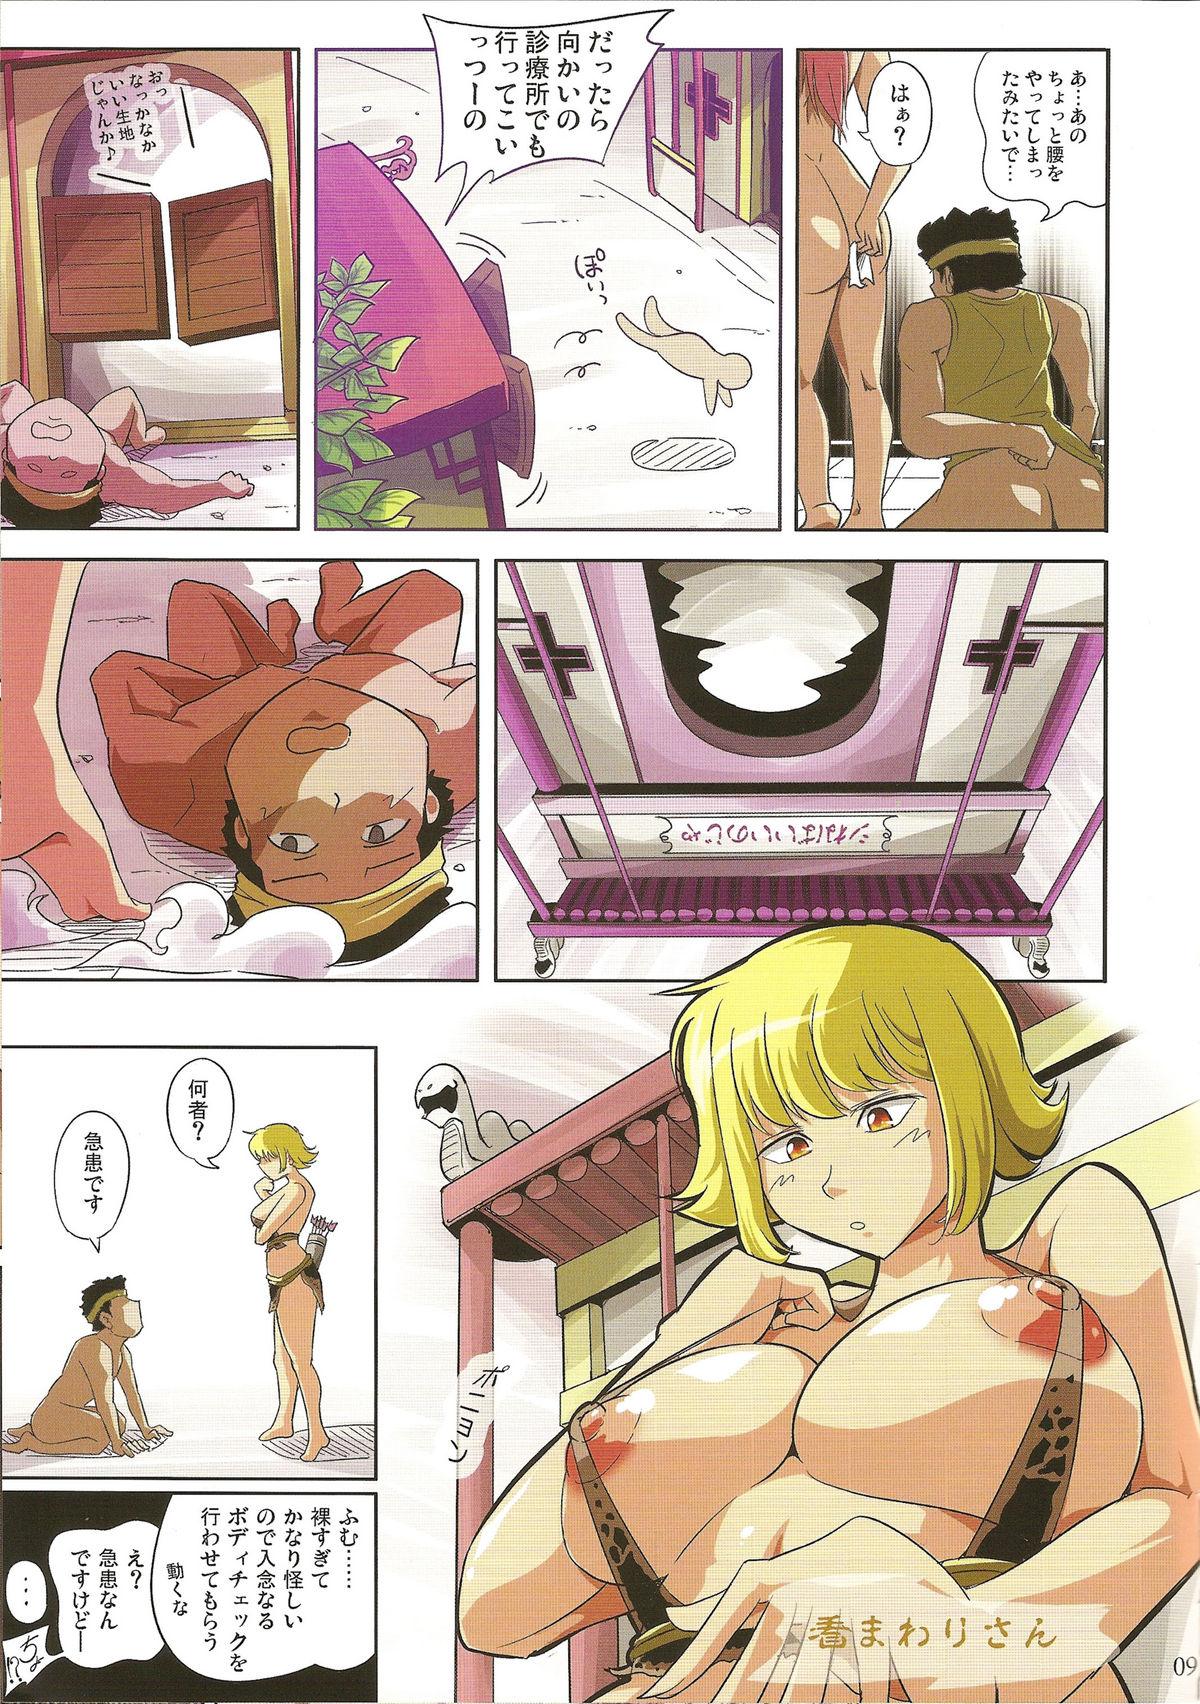 Strapon Tougenkyou - One piece Home - Page 9